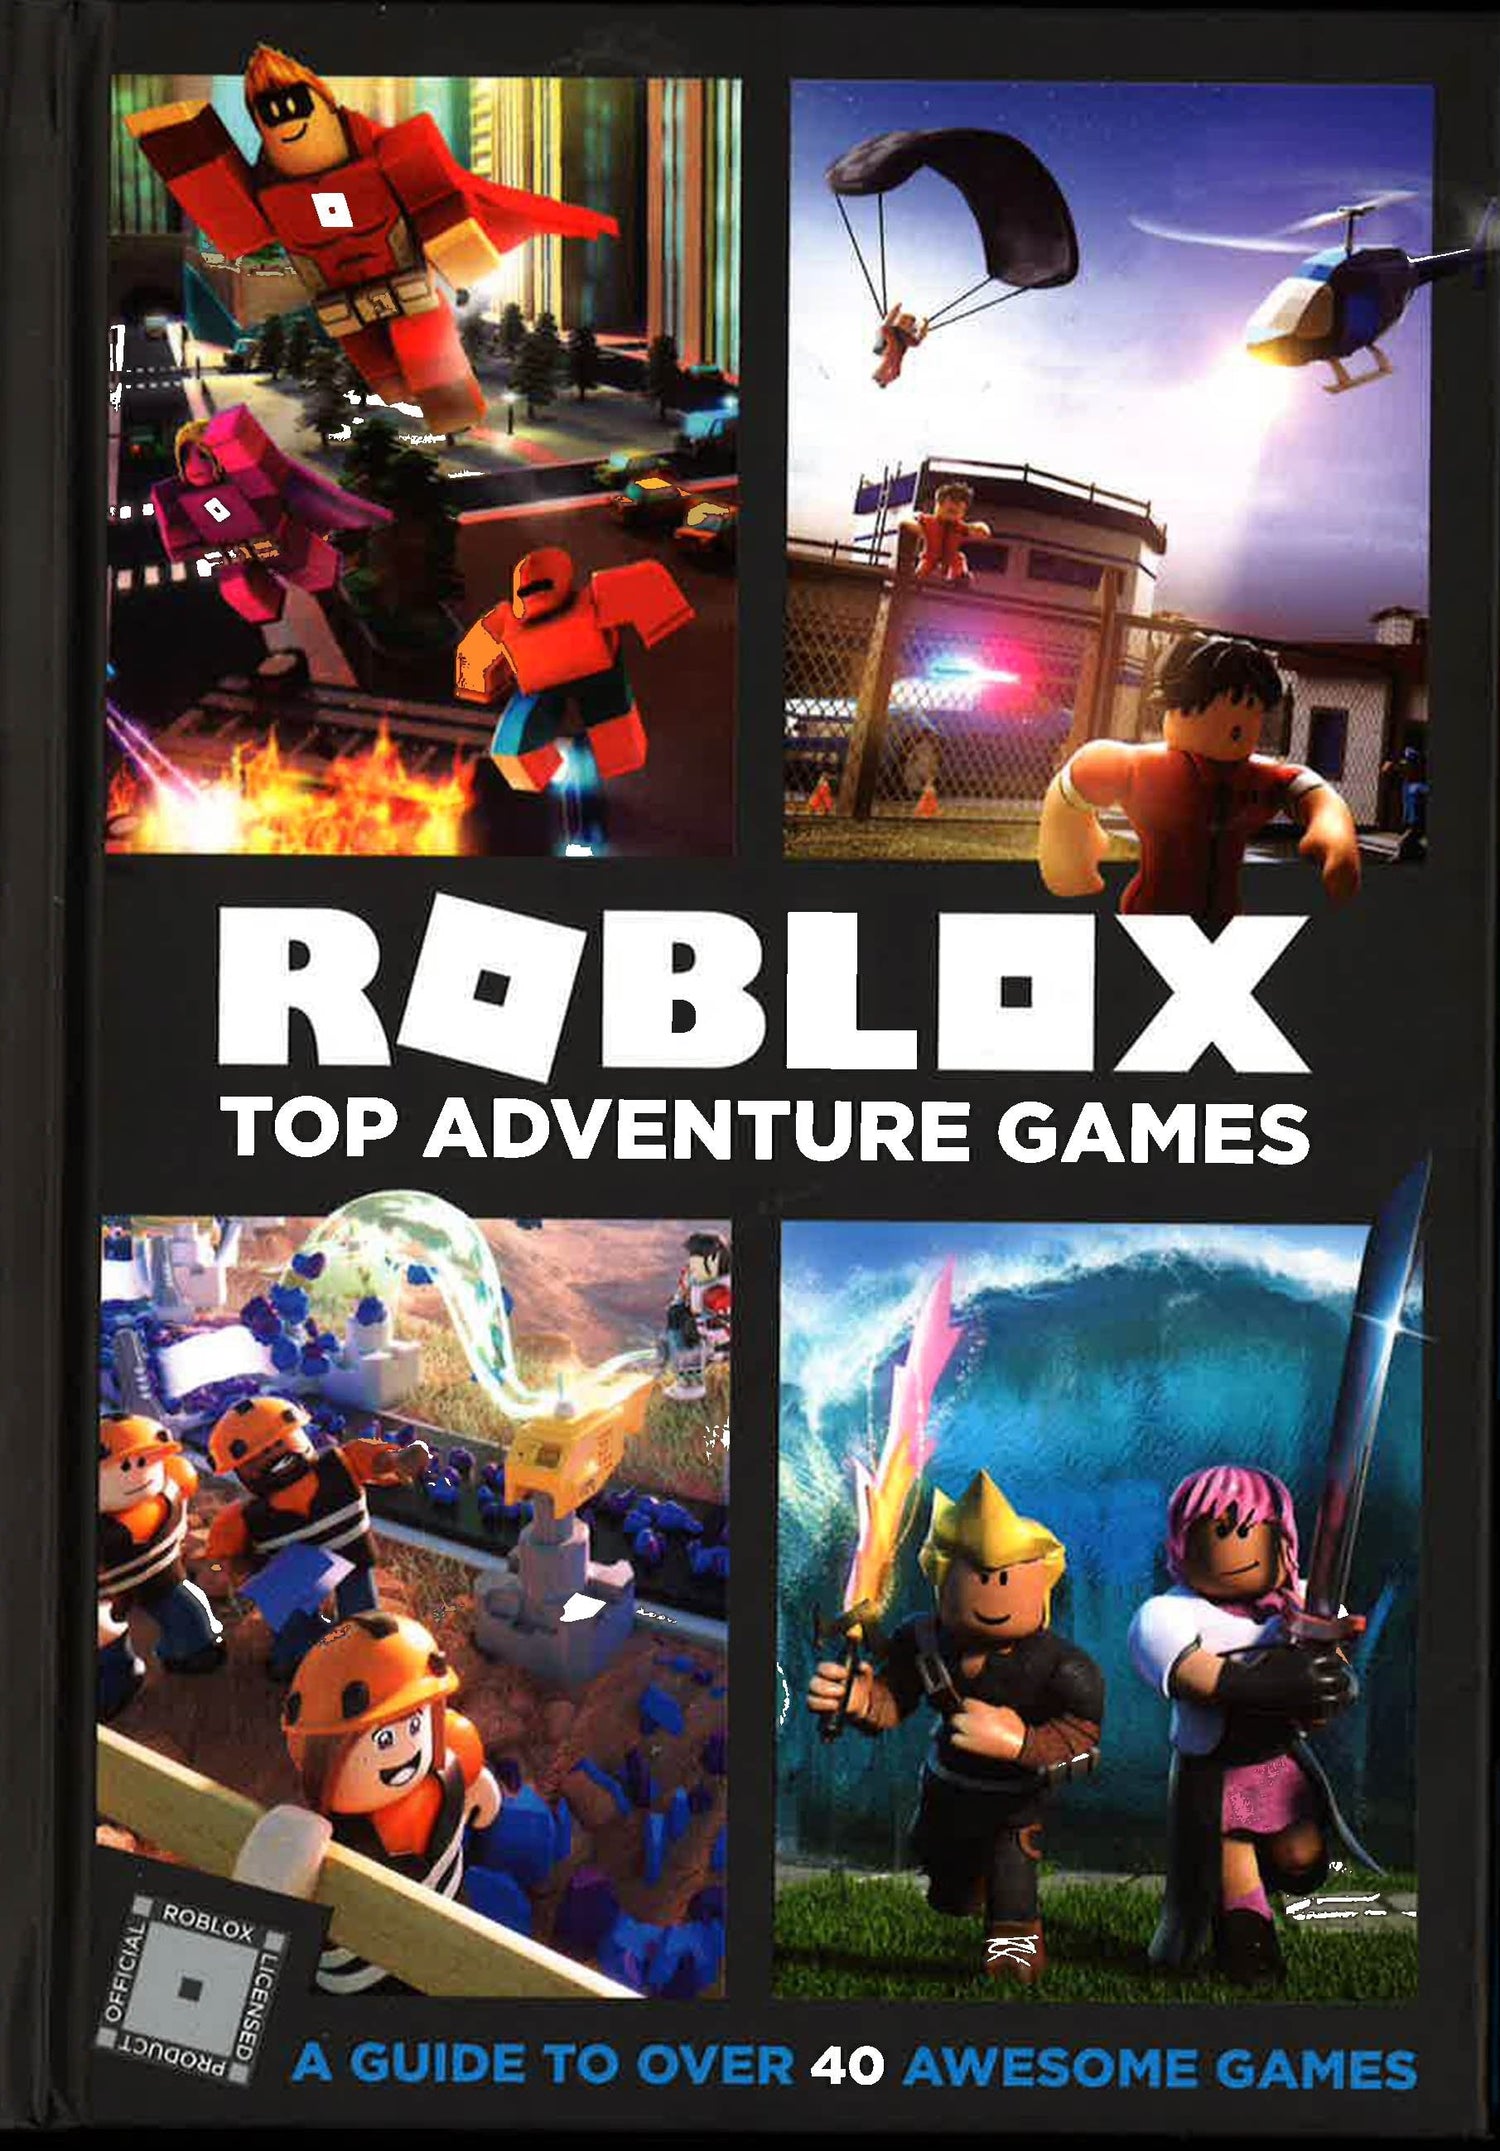 Roblox Character by Official Roblox Books (HarperCollins)